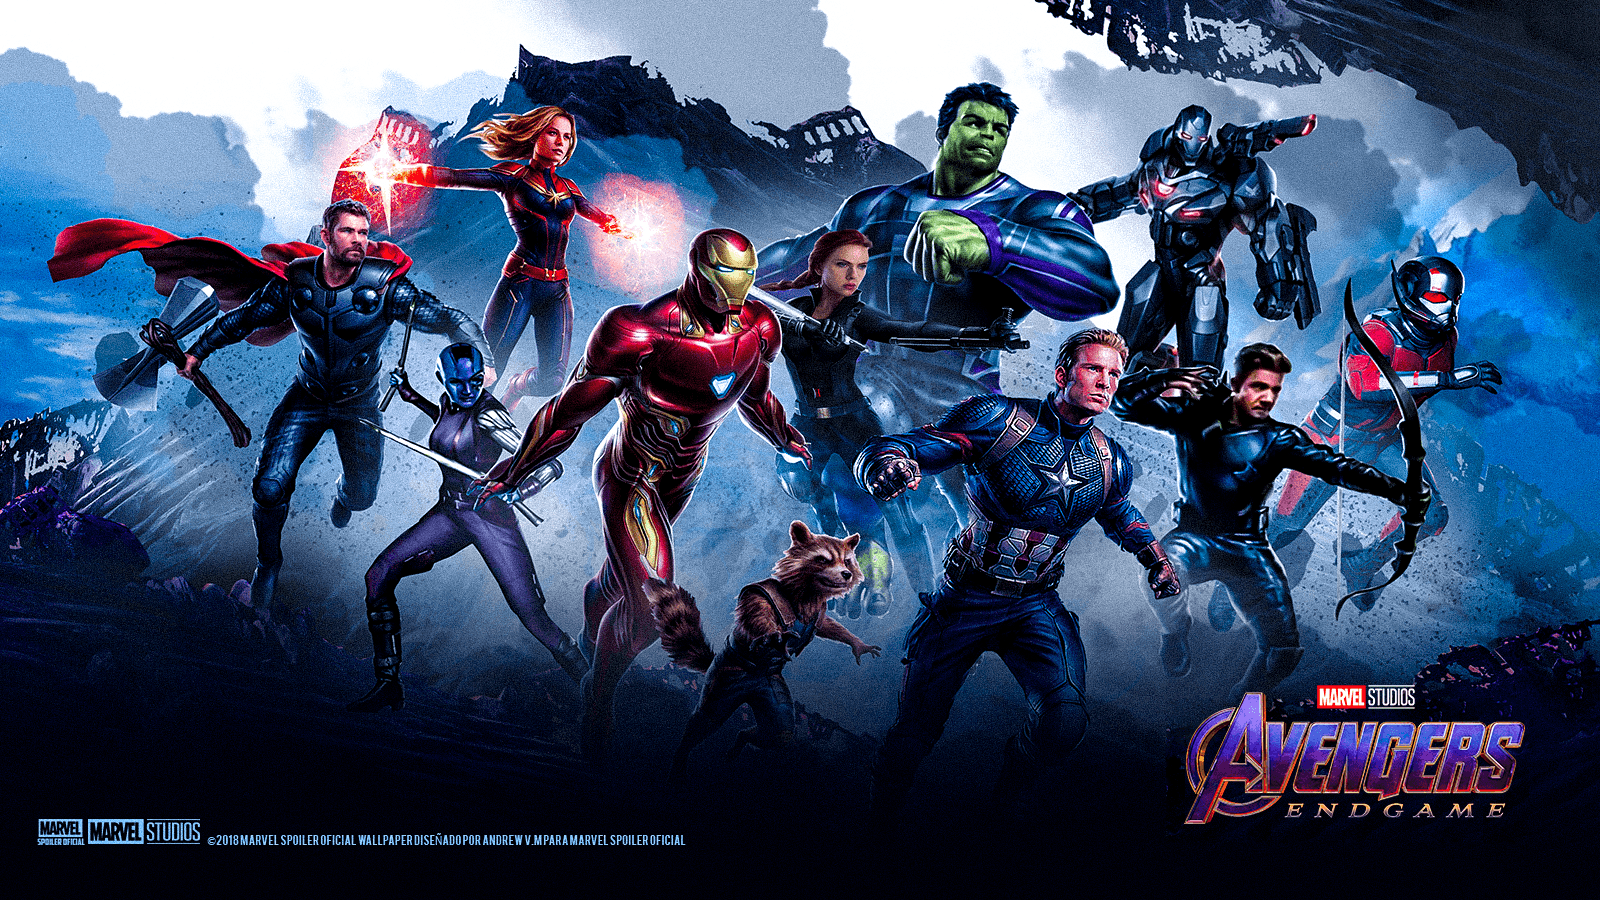 Avengers End Game And Infinity War 2K Wallpapers Download In K